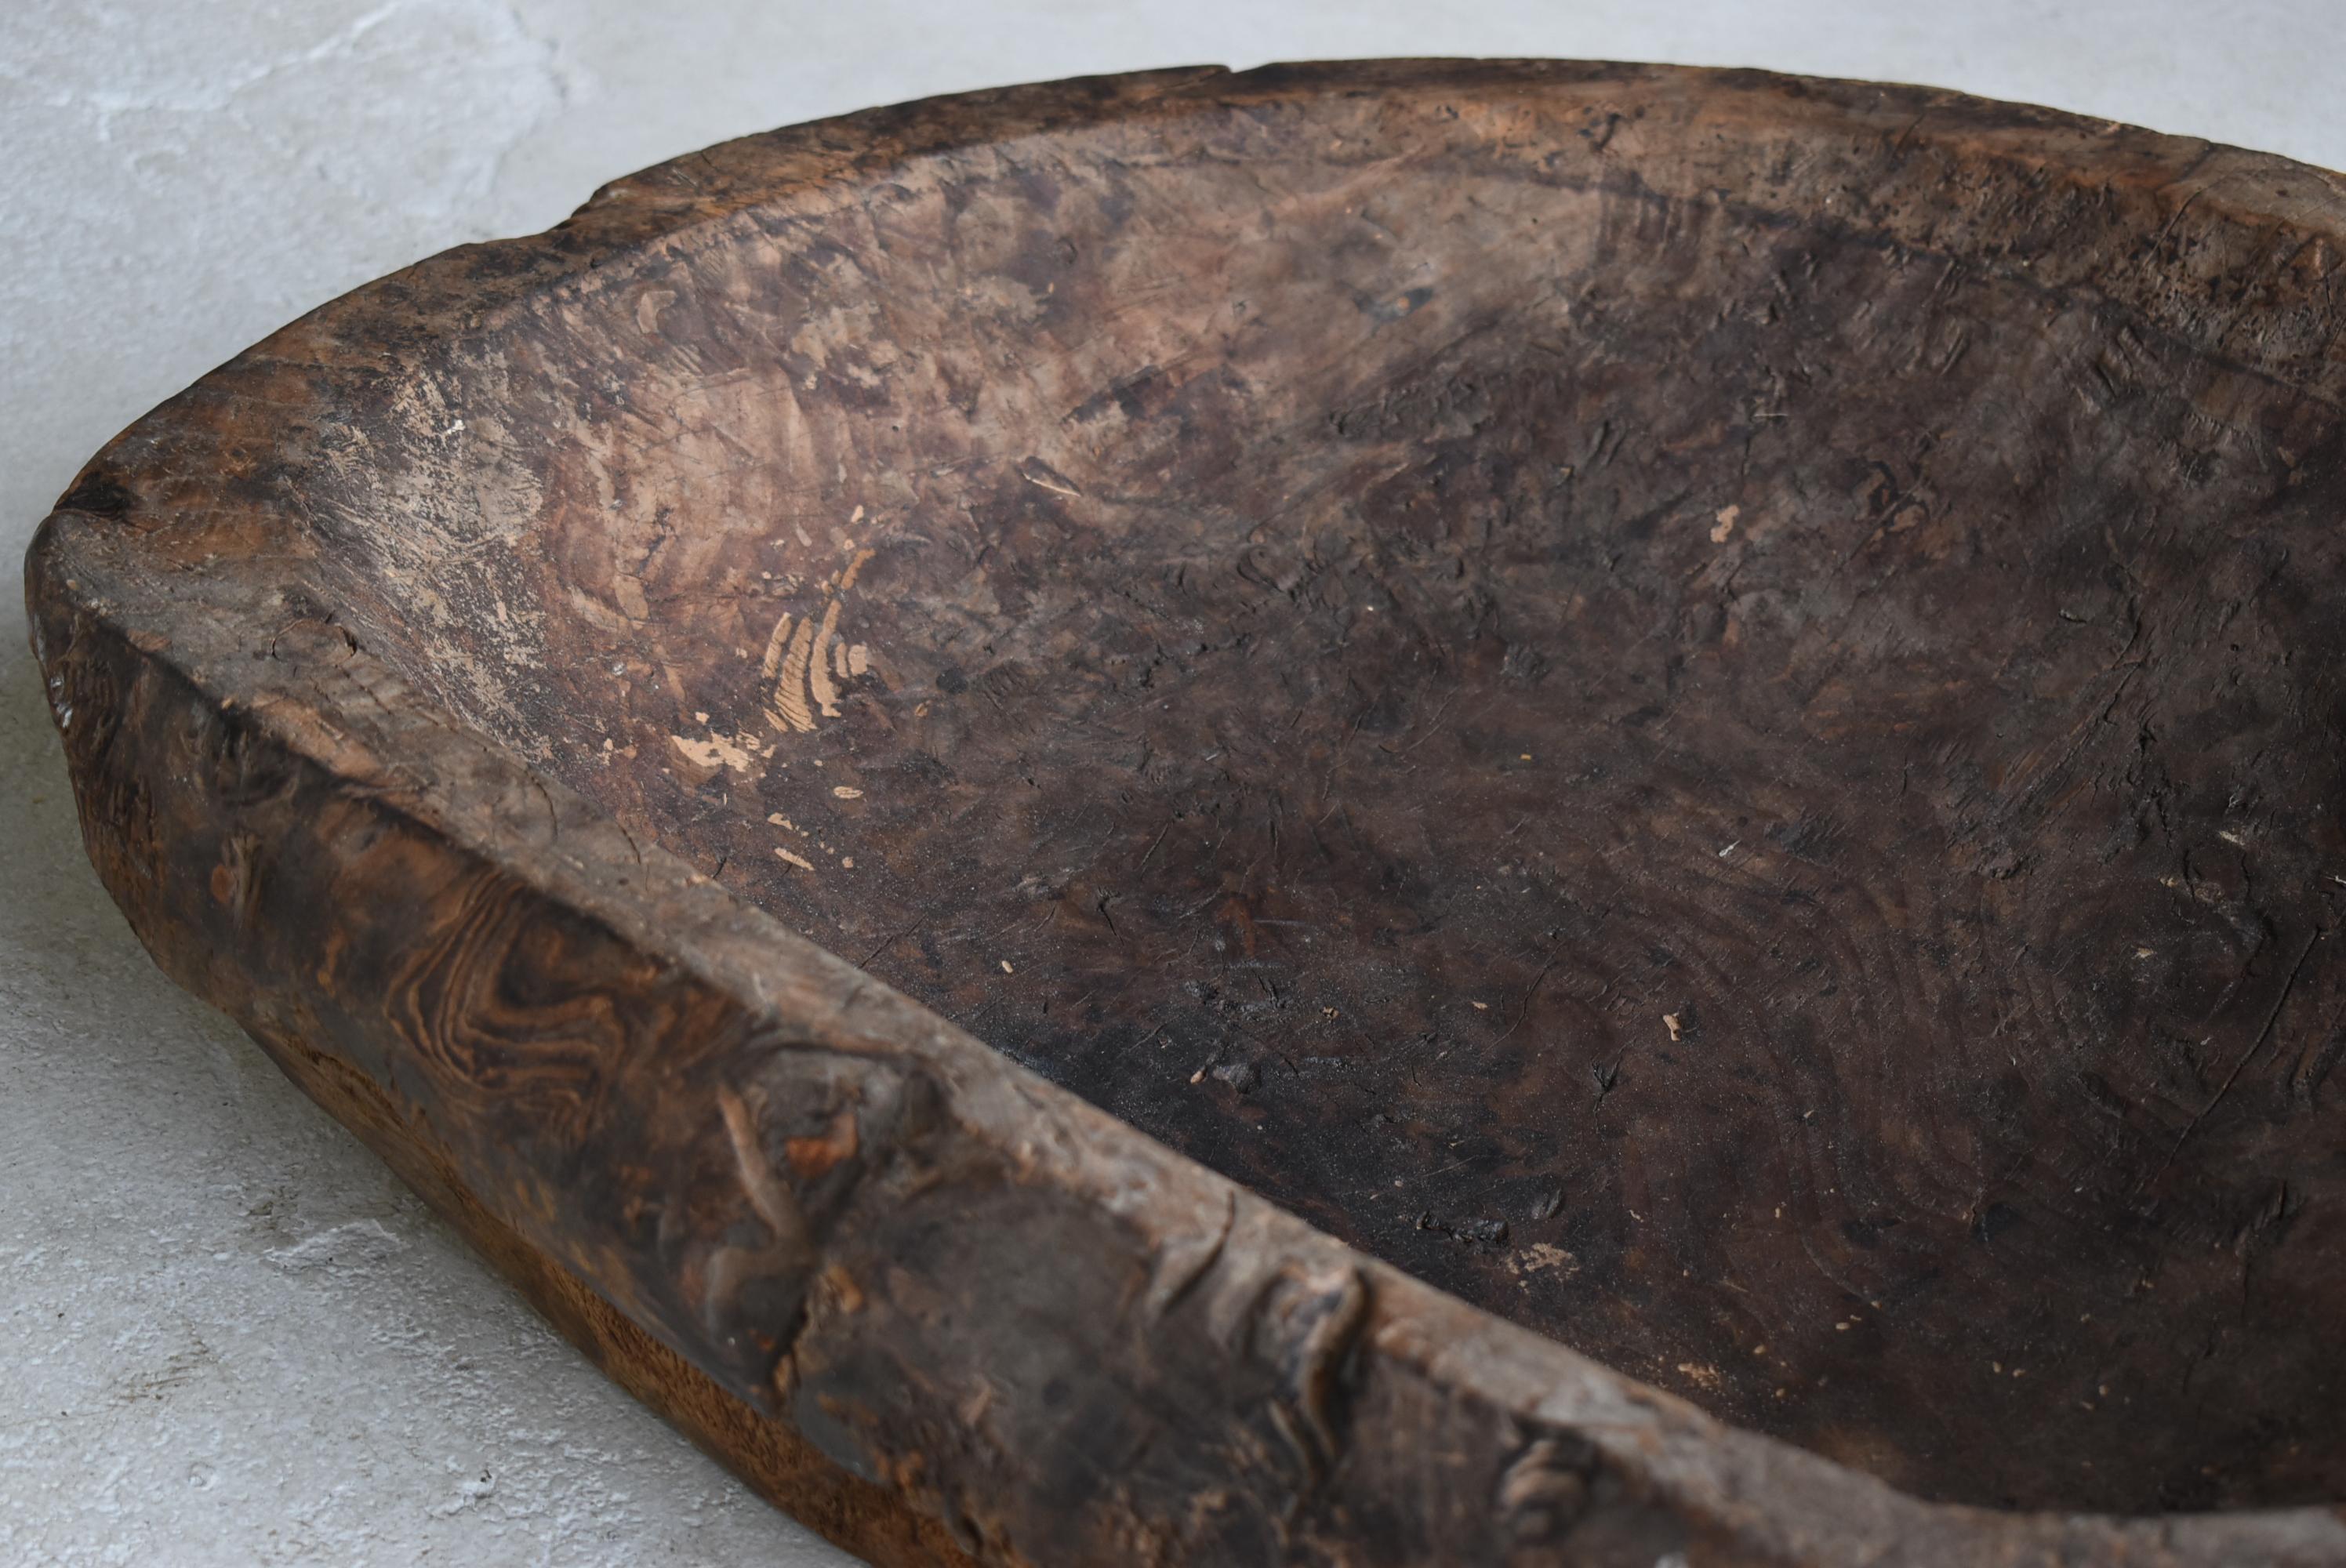 It is a wooden bowl found at a Japanese farmhouse.
It seems to be an item from the Edo period to the Meiji period.
It is tasty and beautiful.

The purpose is unknown, but it will be enough to just put it down and look at it.

Enjoy the world of